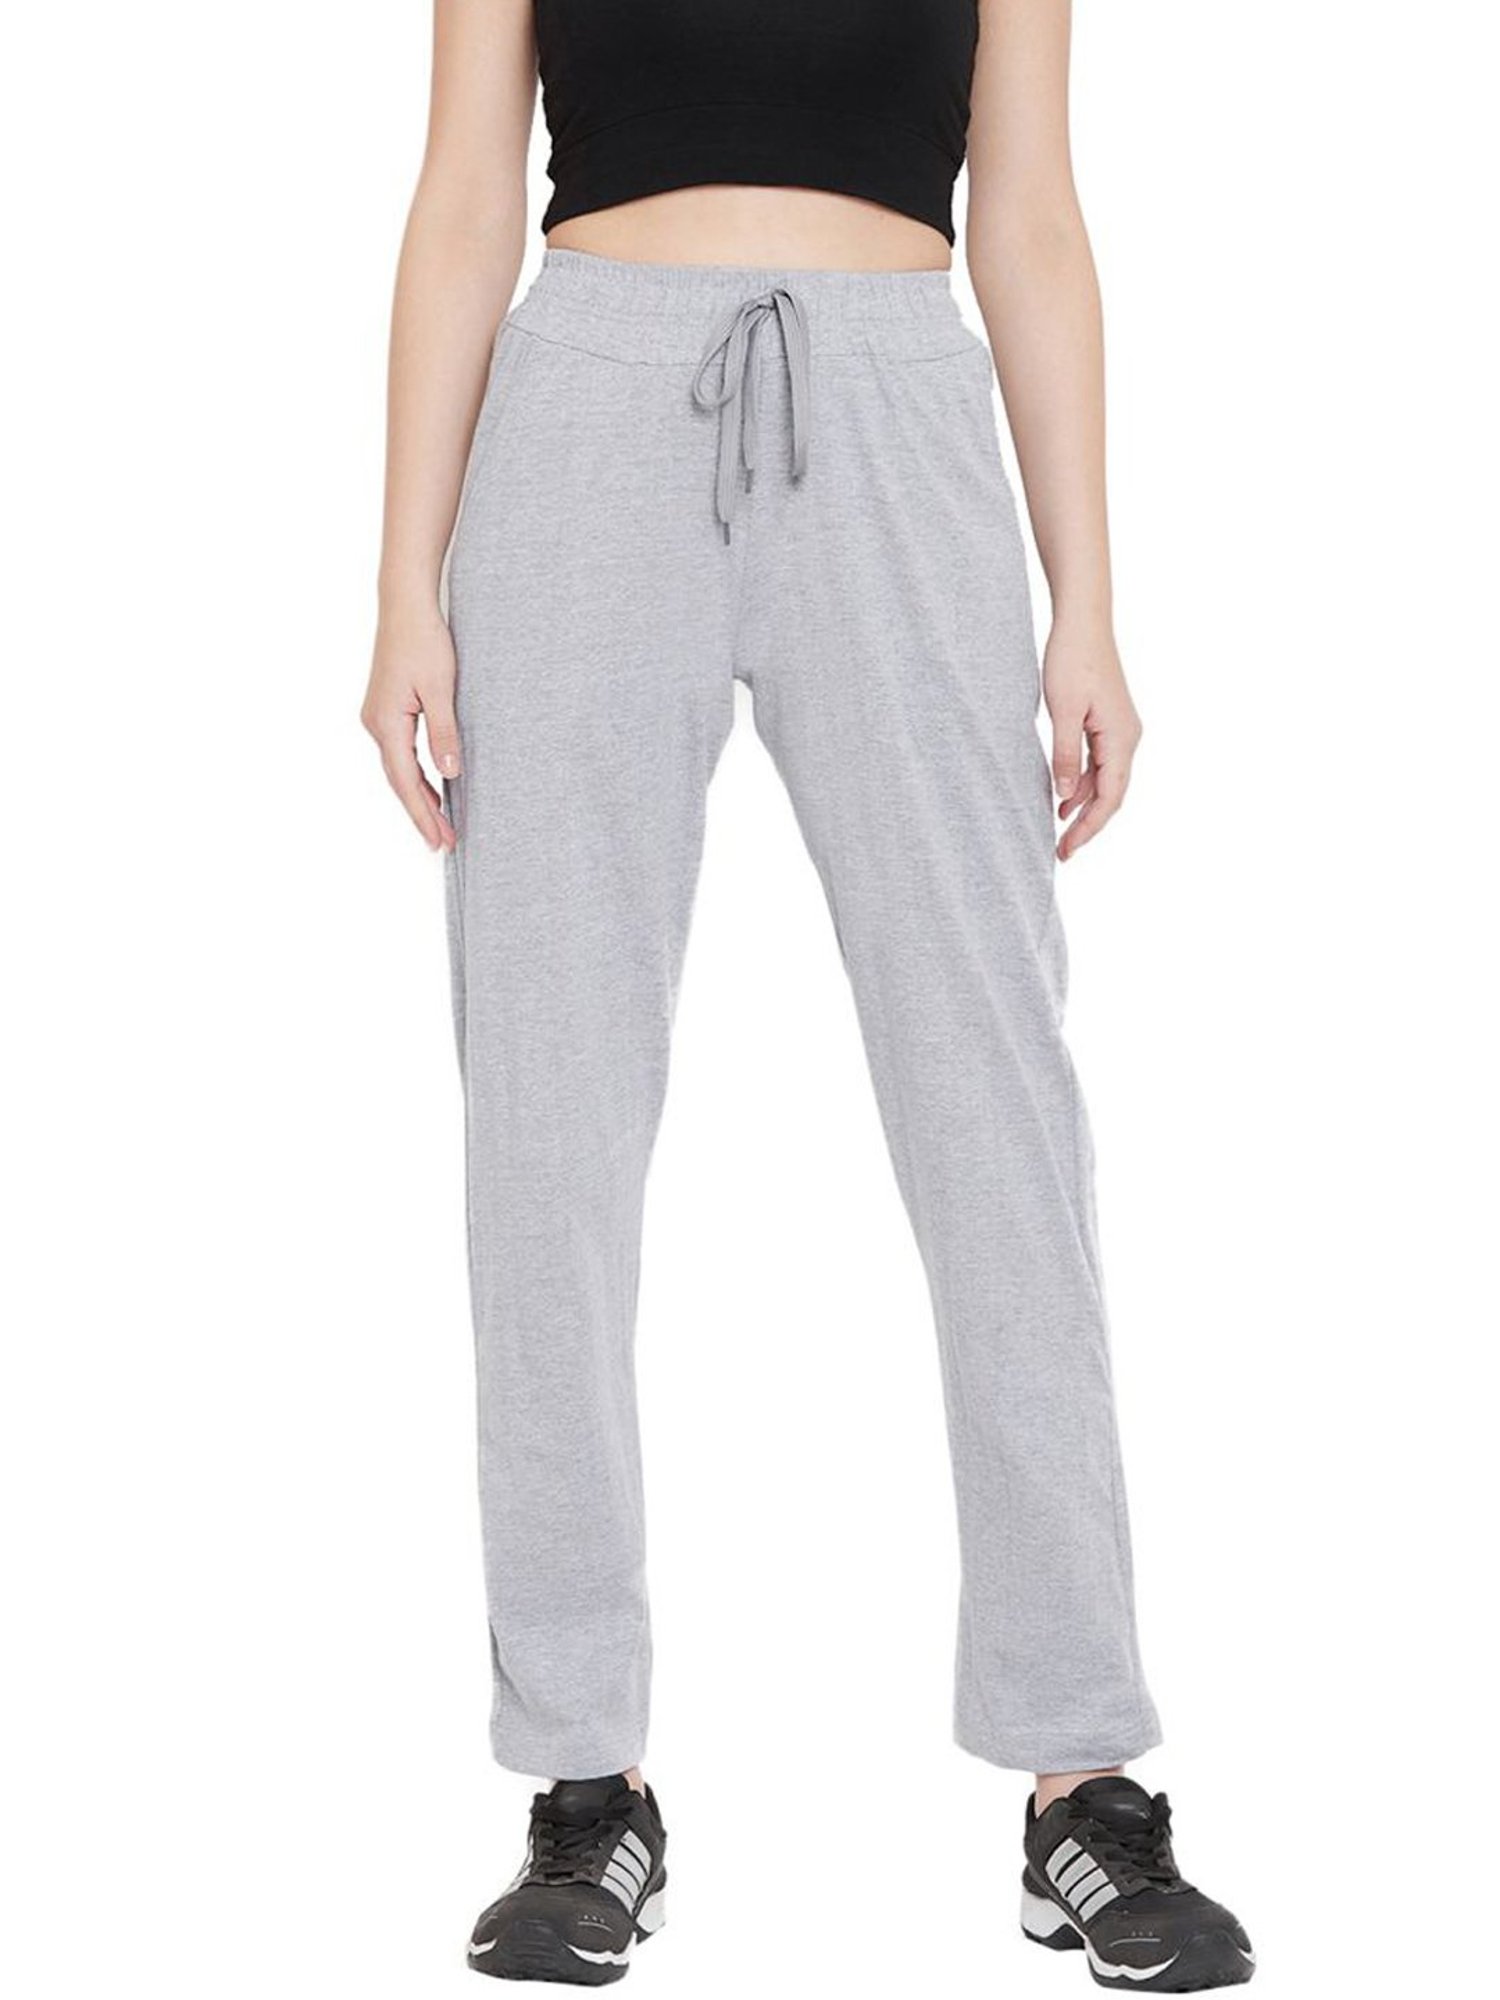 Prettylittlething Grey Embroidered Cuffed Track Pants  PrettyLittleThing  AUS